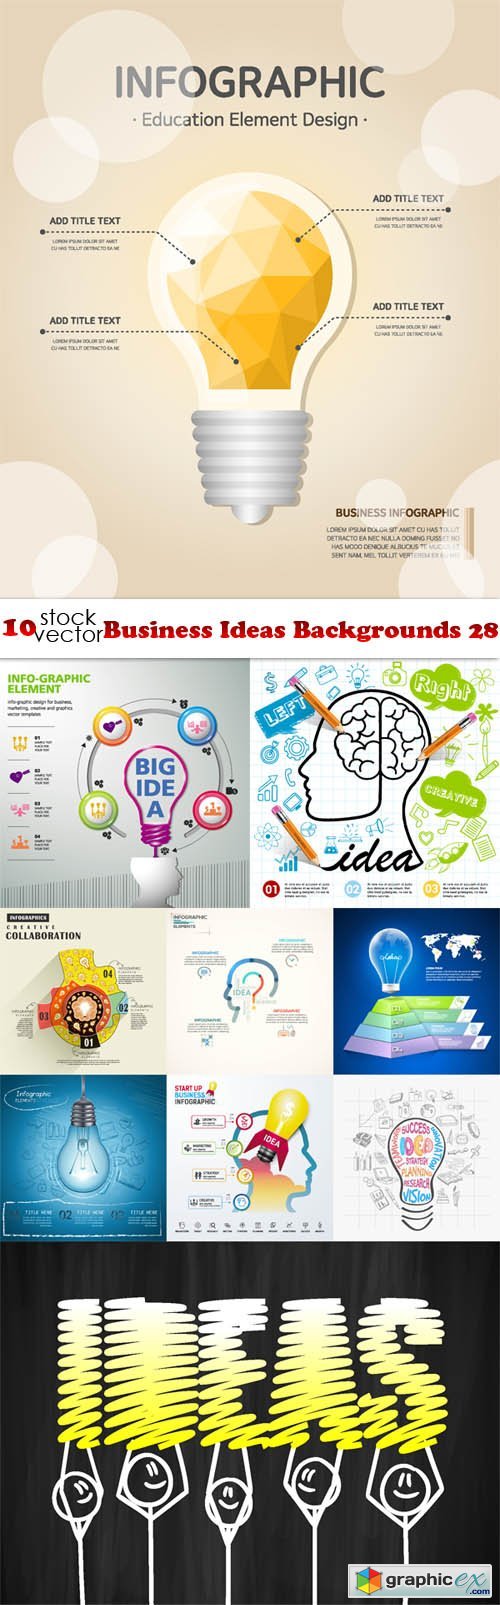 Business Ideas Backgrounds 28